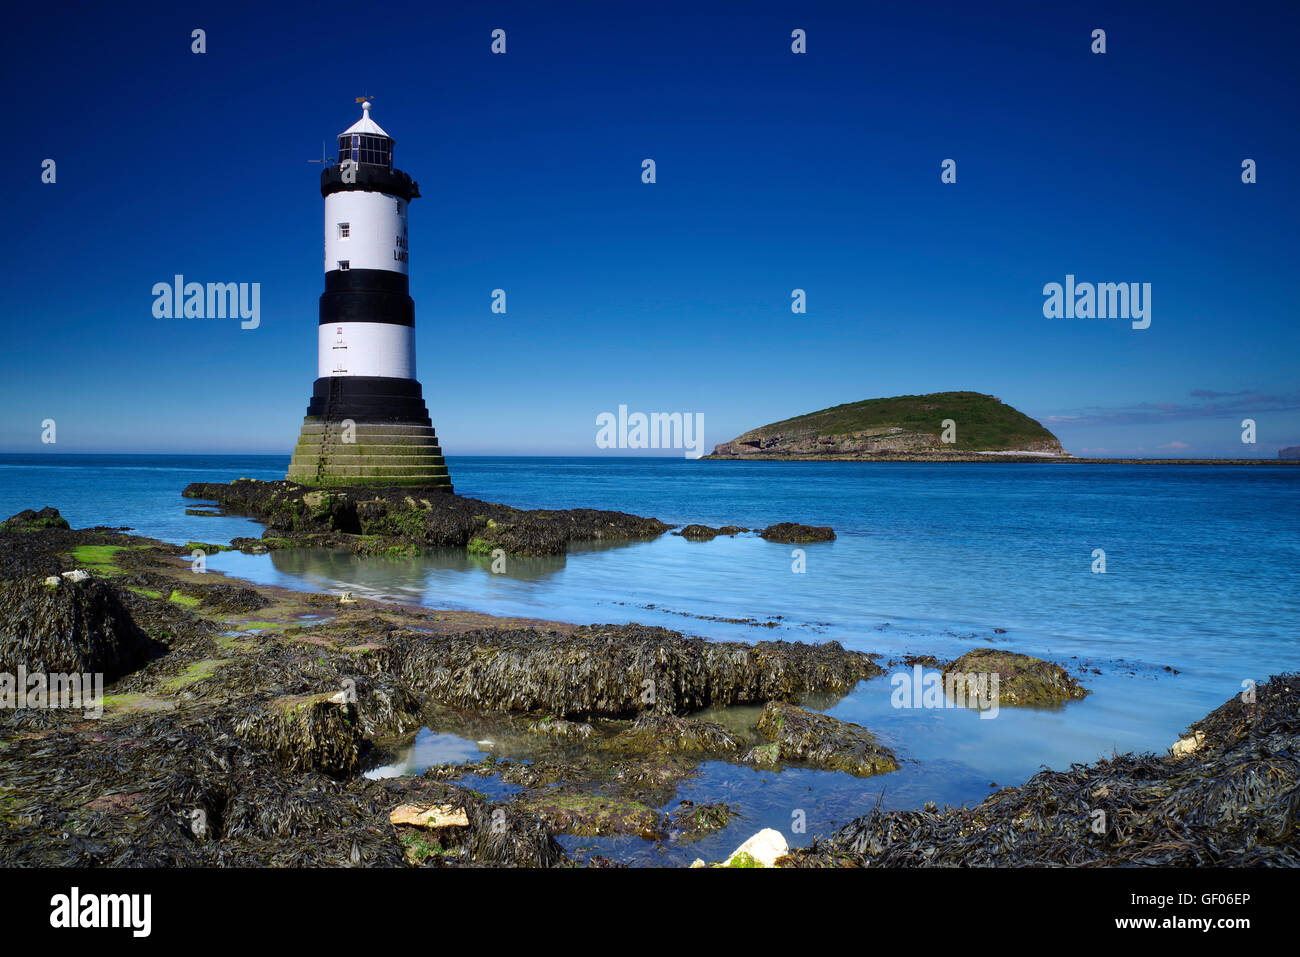 Phare de Penmon, Llanfaes, Anglesey, Banque D'Images